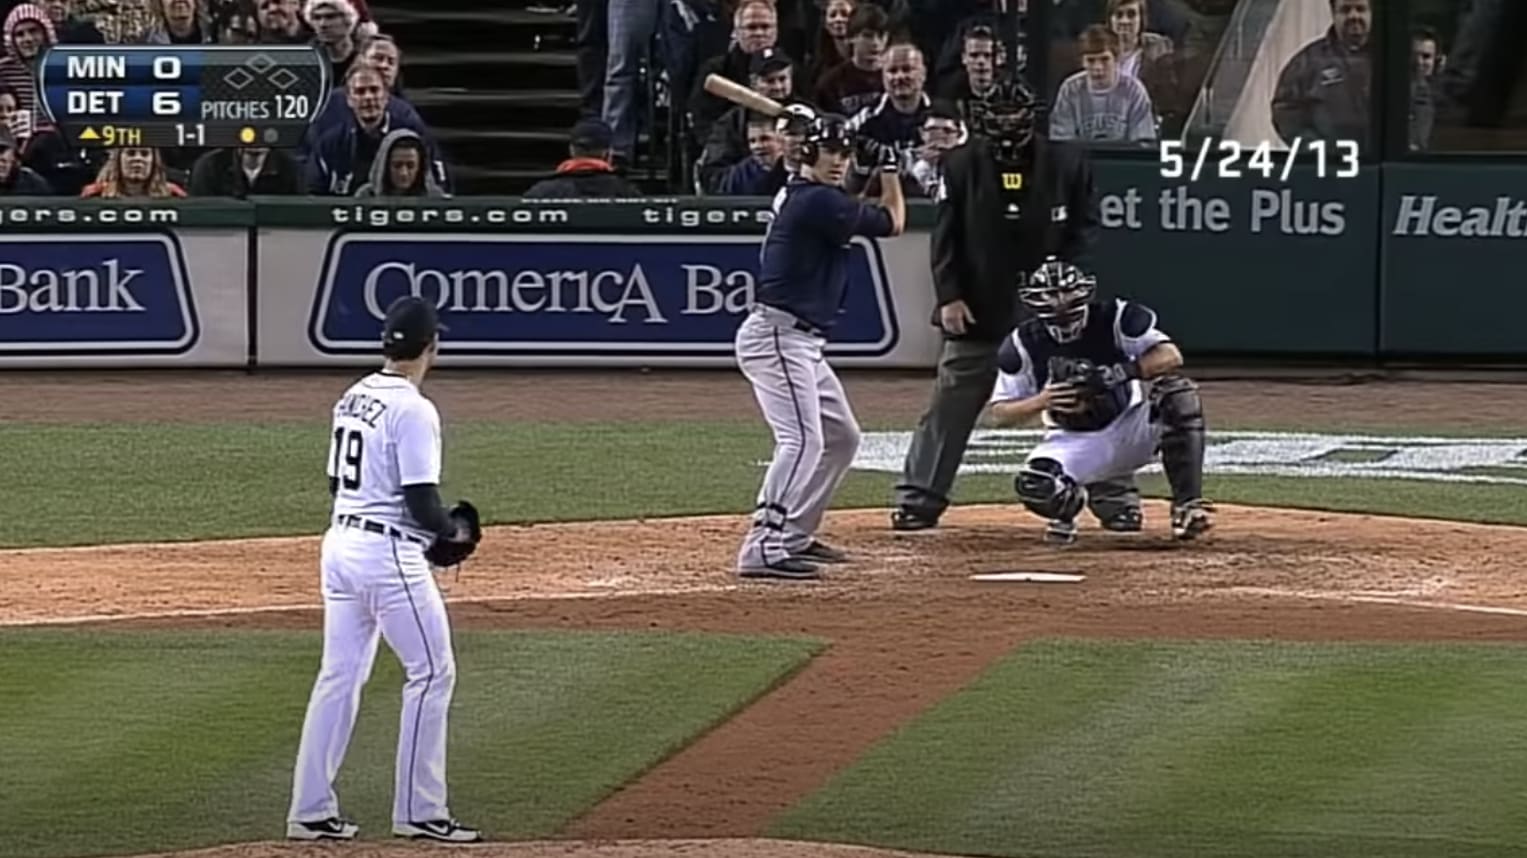 VIDEO: Remembering When Joe Mauer Ruined Anibal Sanchez's No-Hitter in the 9th Inning